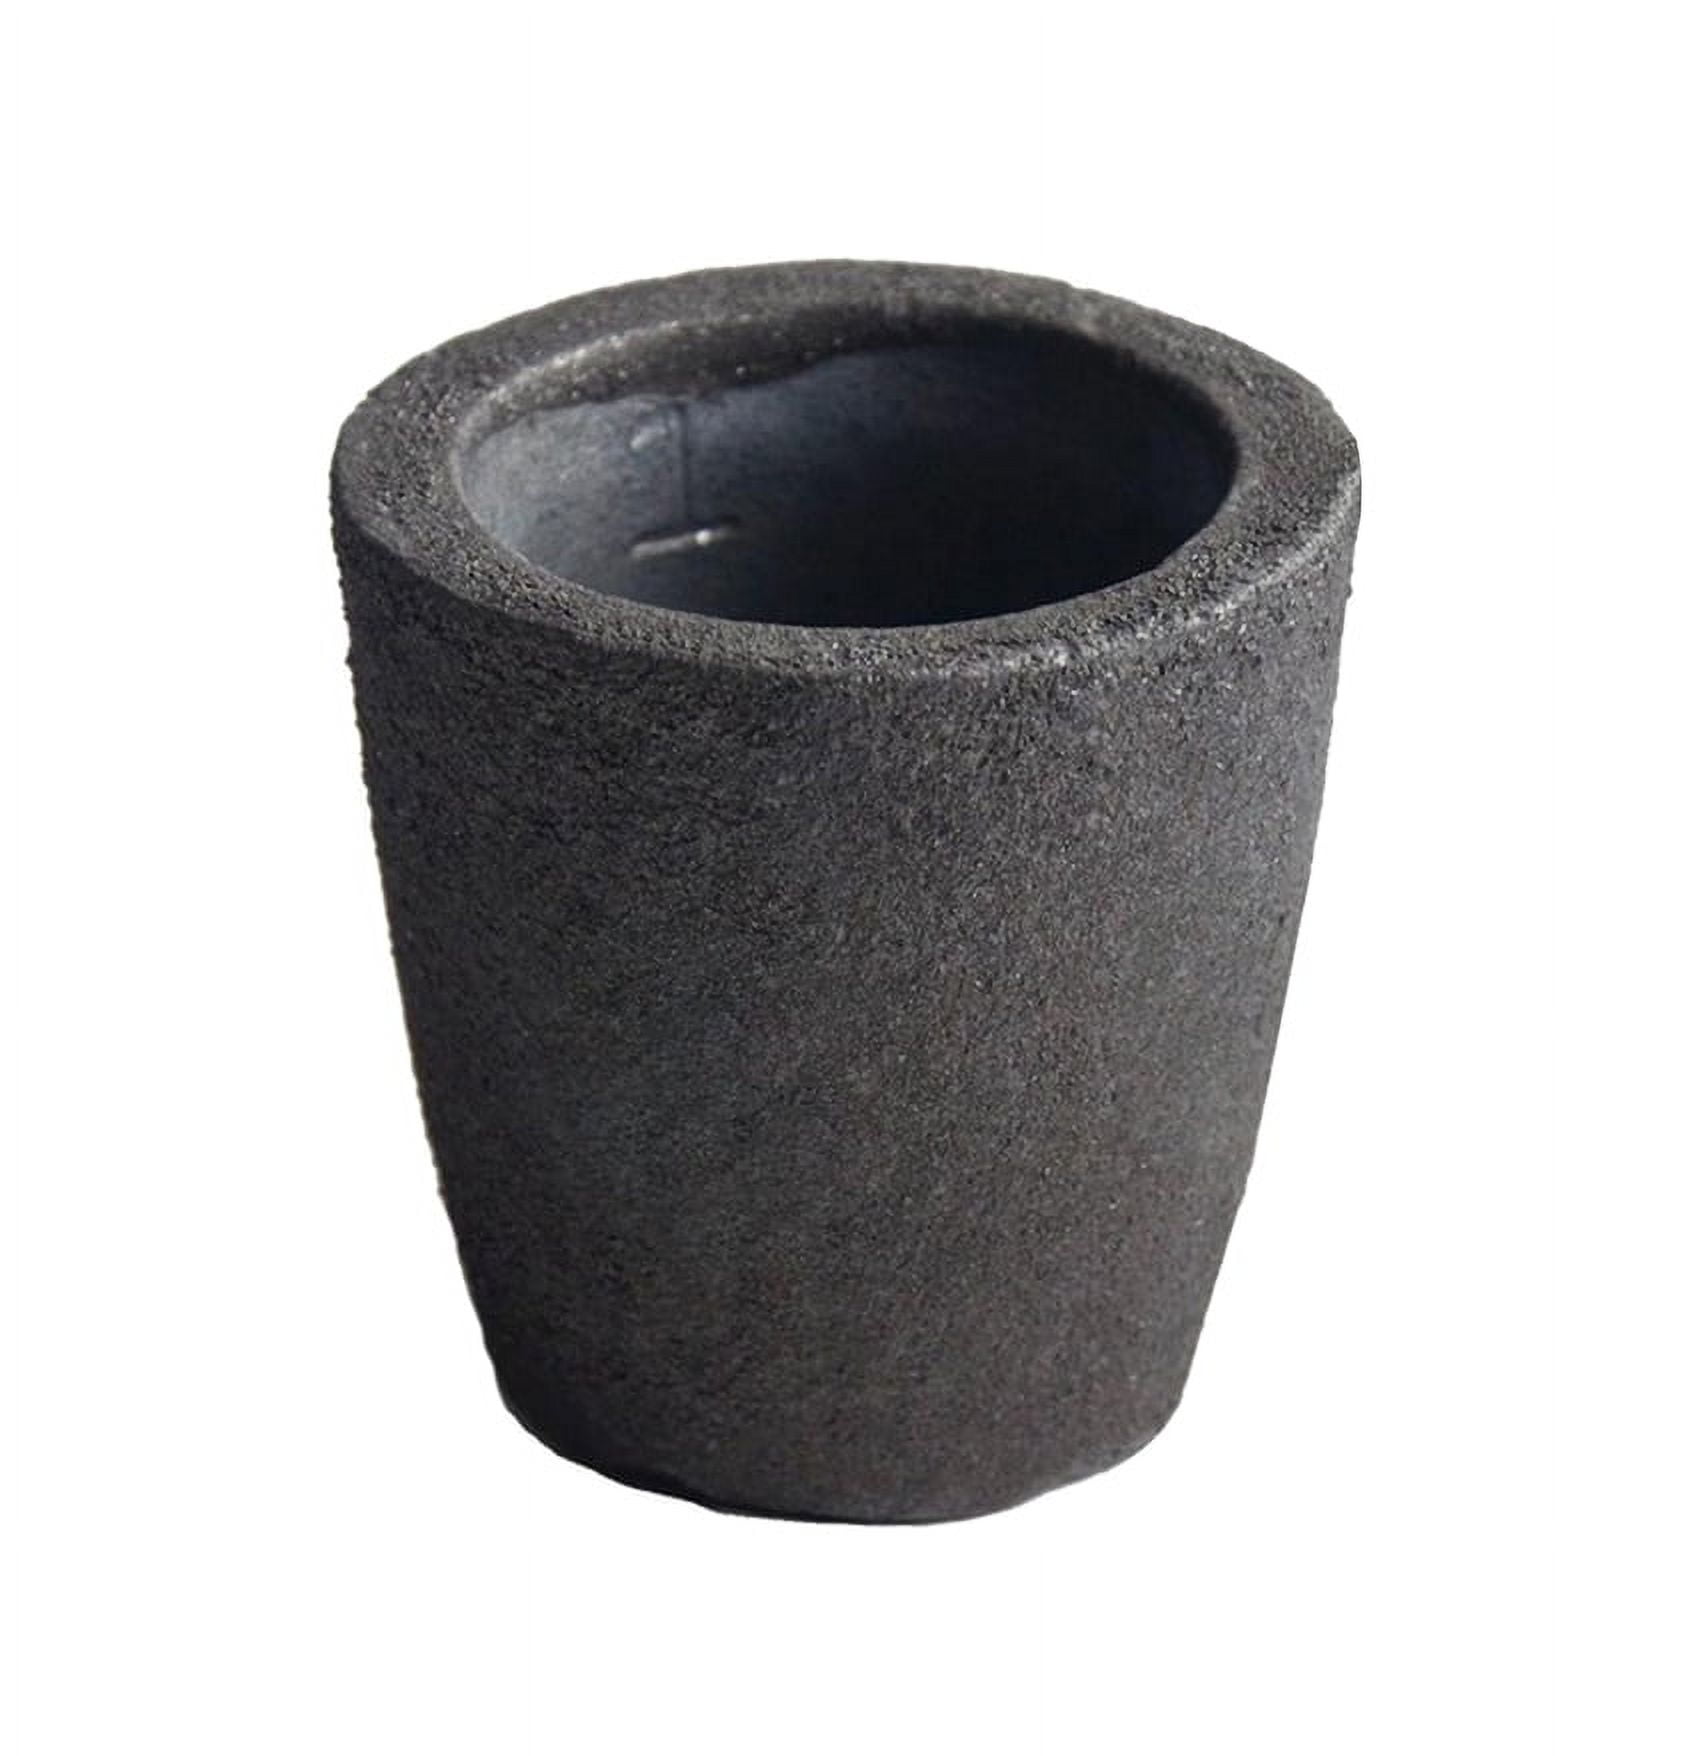  EXCEART 2 Pcs Copper Crucible Metal Foundry Crucibles for  Melting Metal Fire Bricks Ceramic Fused Refractory Cement Crucible Cup  Green Sand Refining Gold Cup Ceramics Paris High Purity : Arts, Crafts